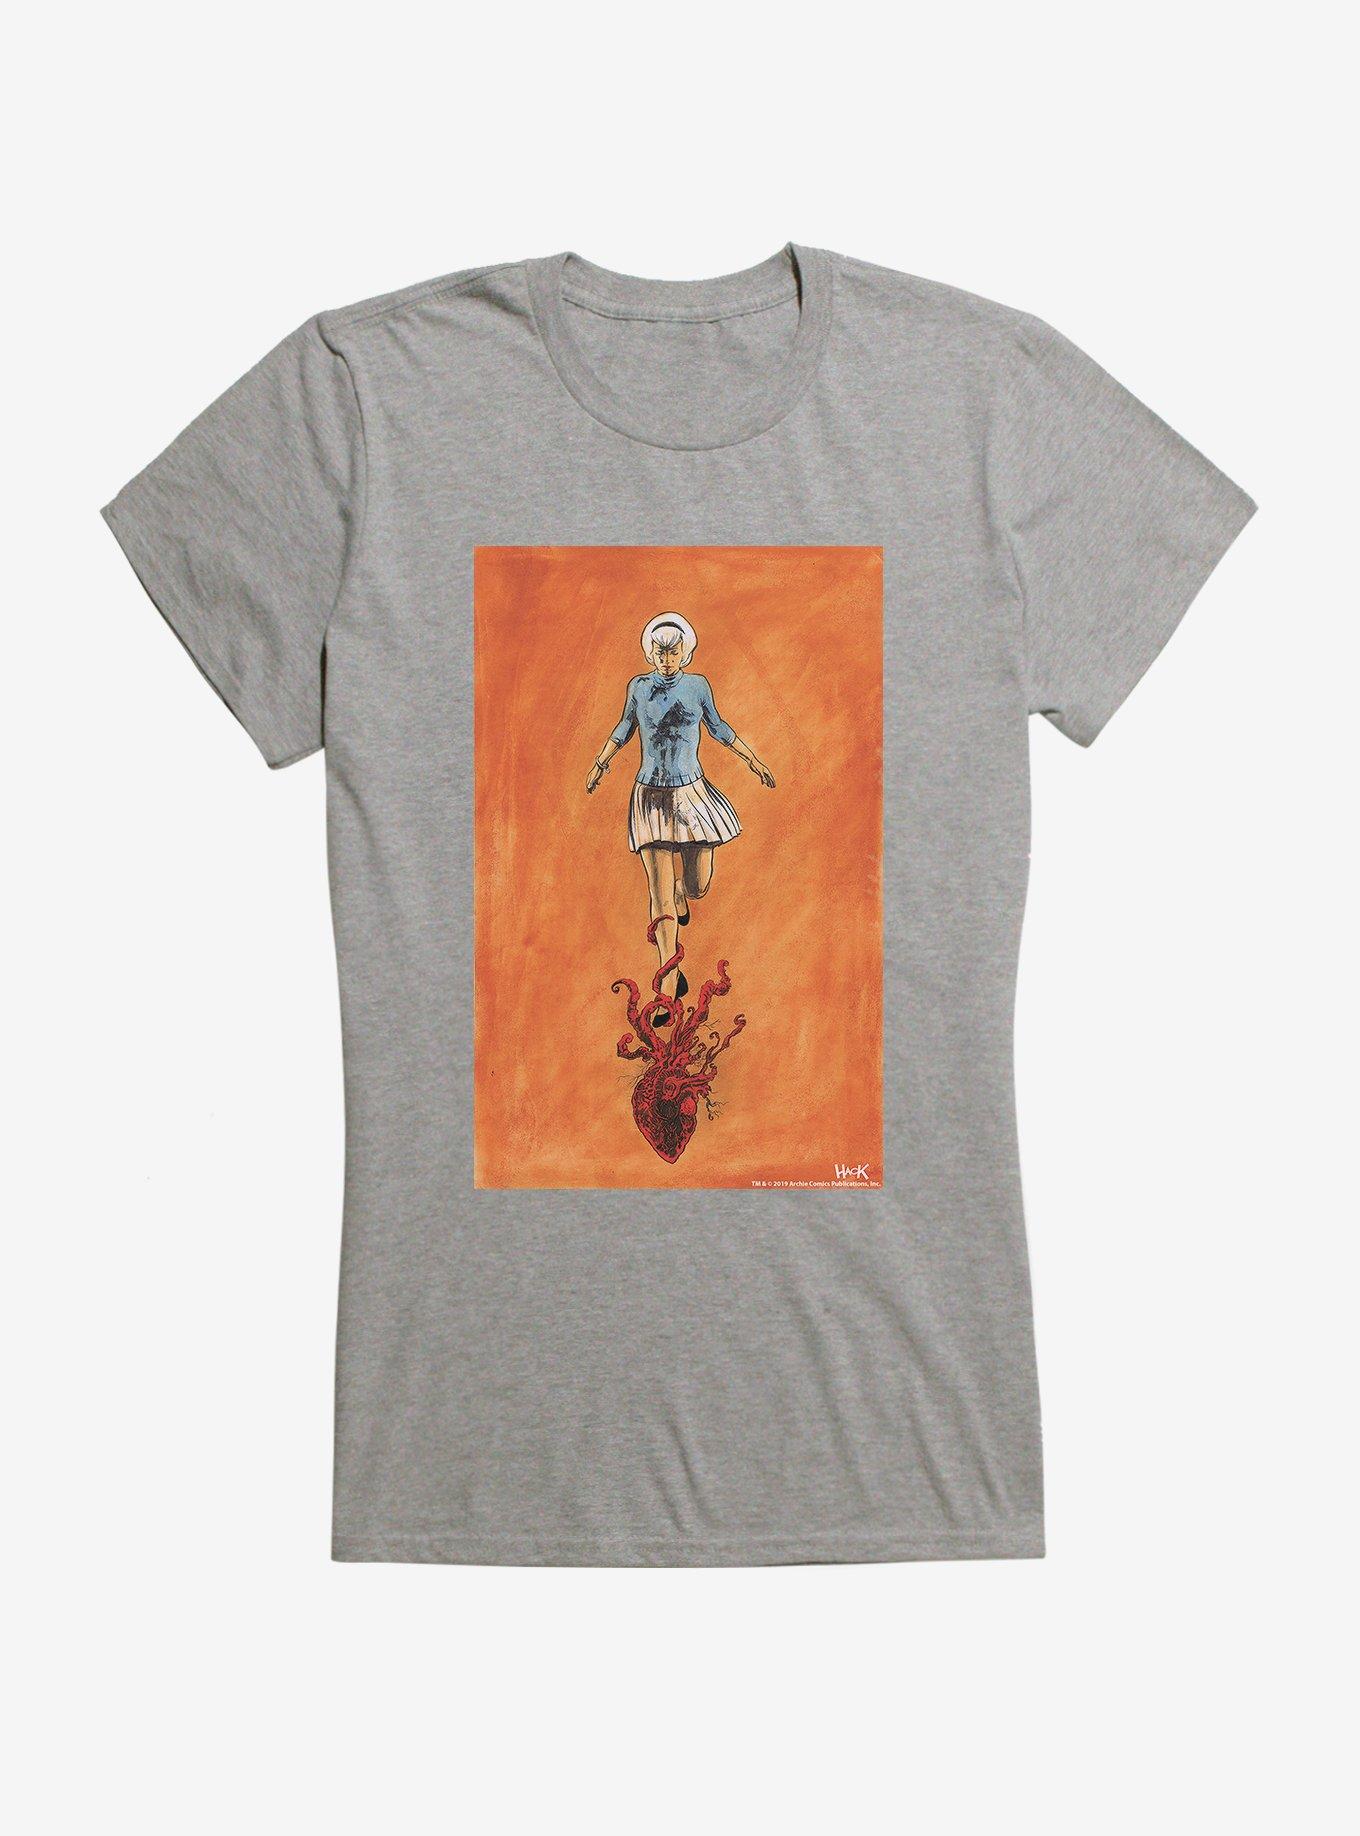 Chilling Adventures Of Sabrina Heart Tentacles Girls T-Shirt, HEATHER, hi-res